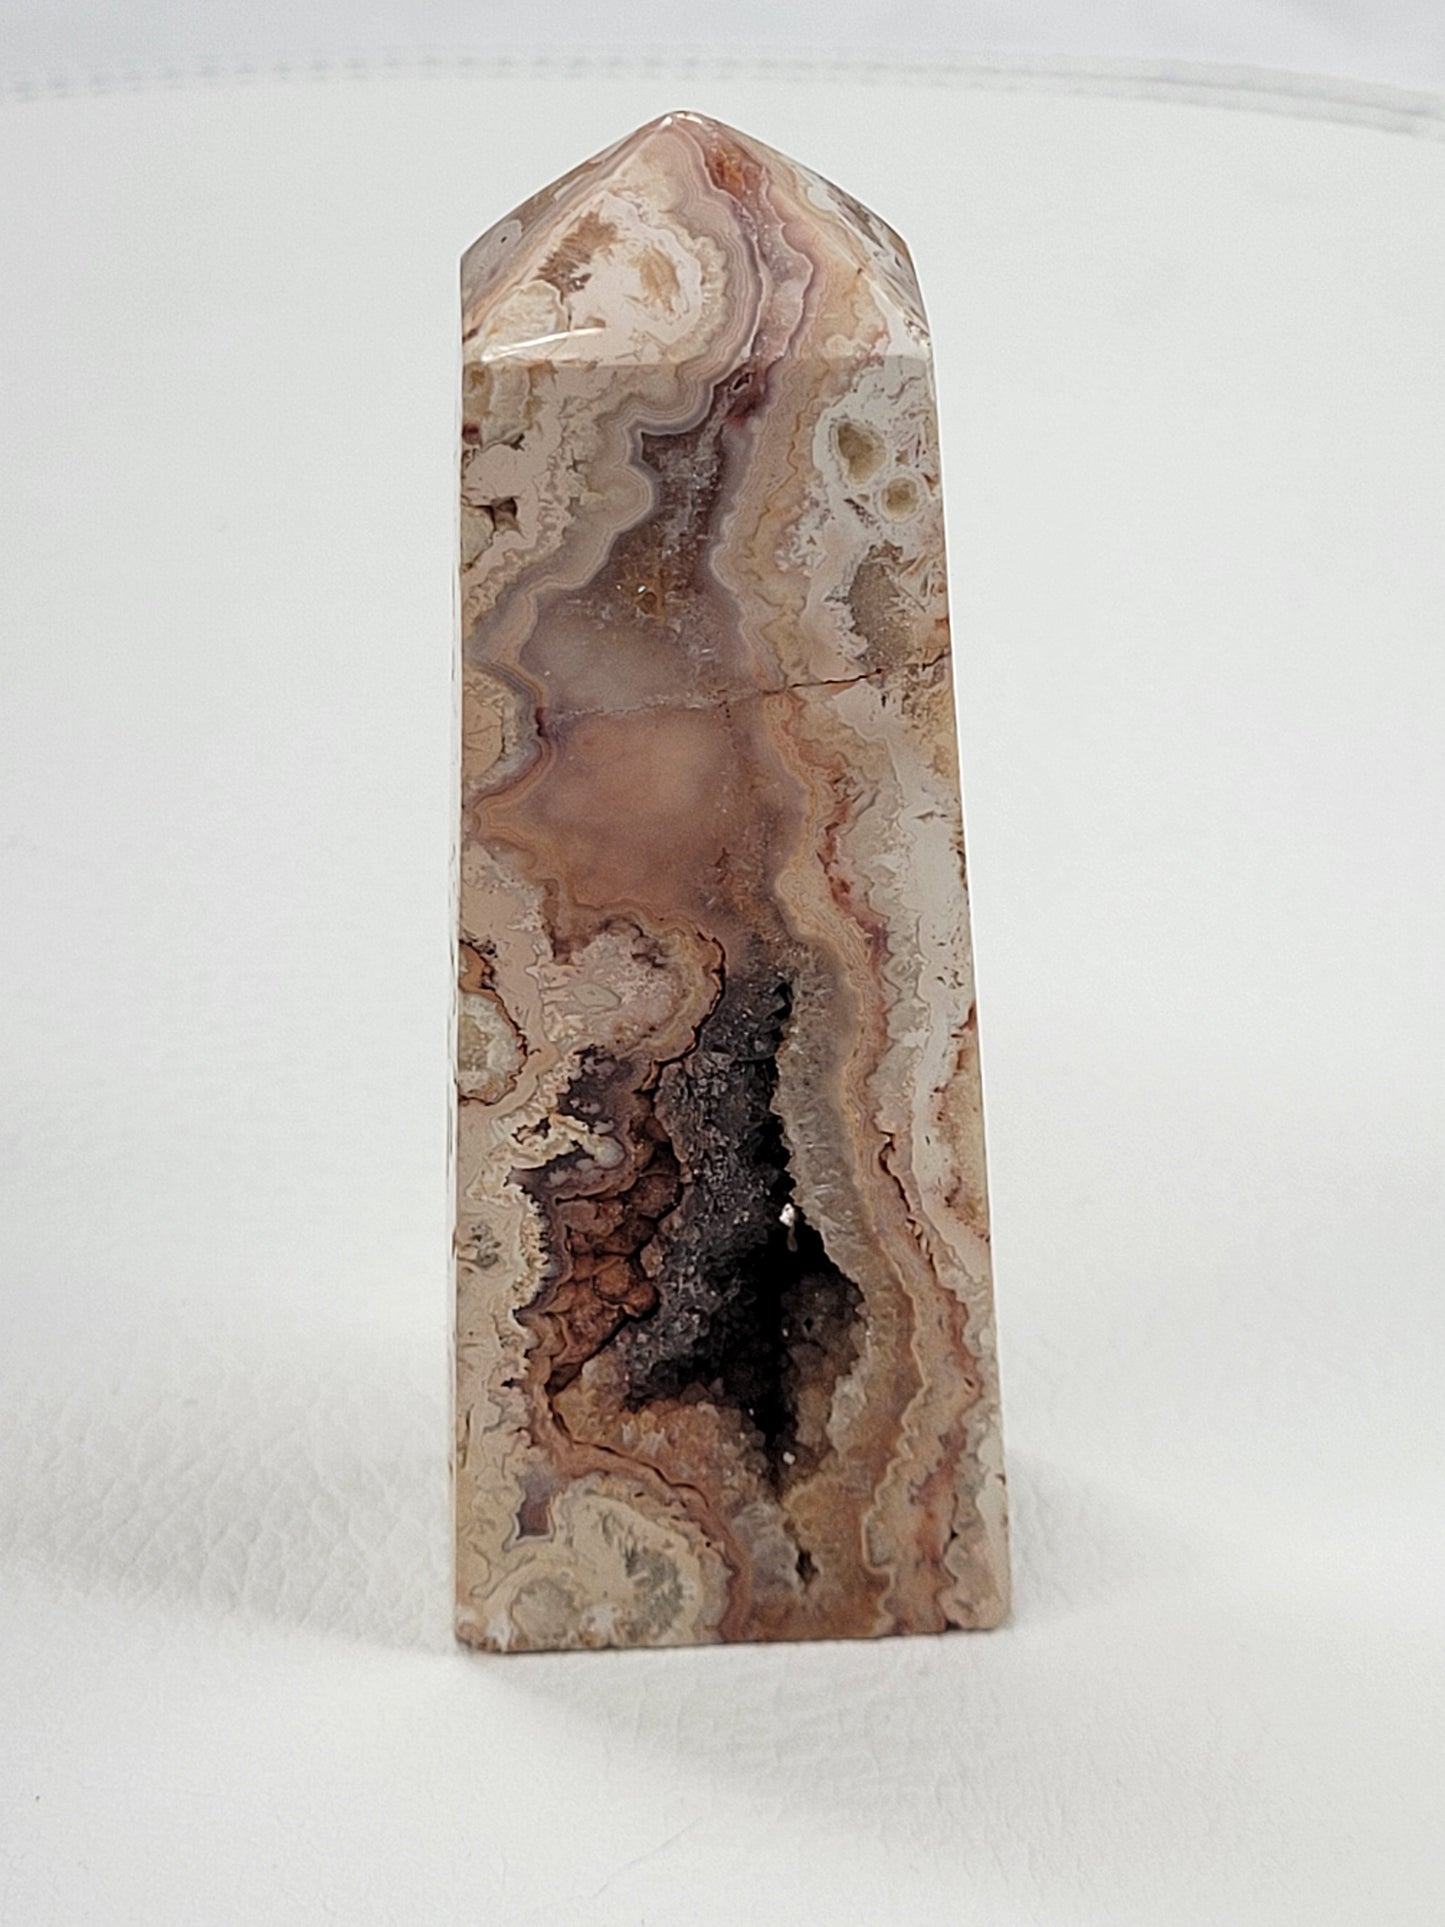 Pink Crazy Lace Agate towers